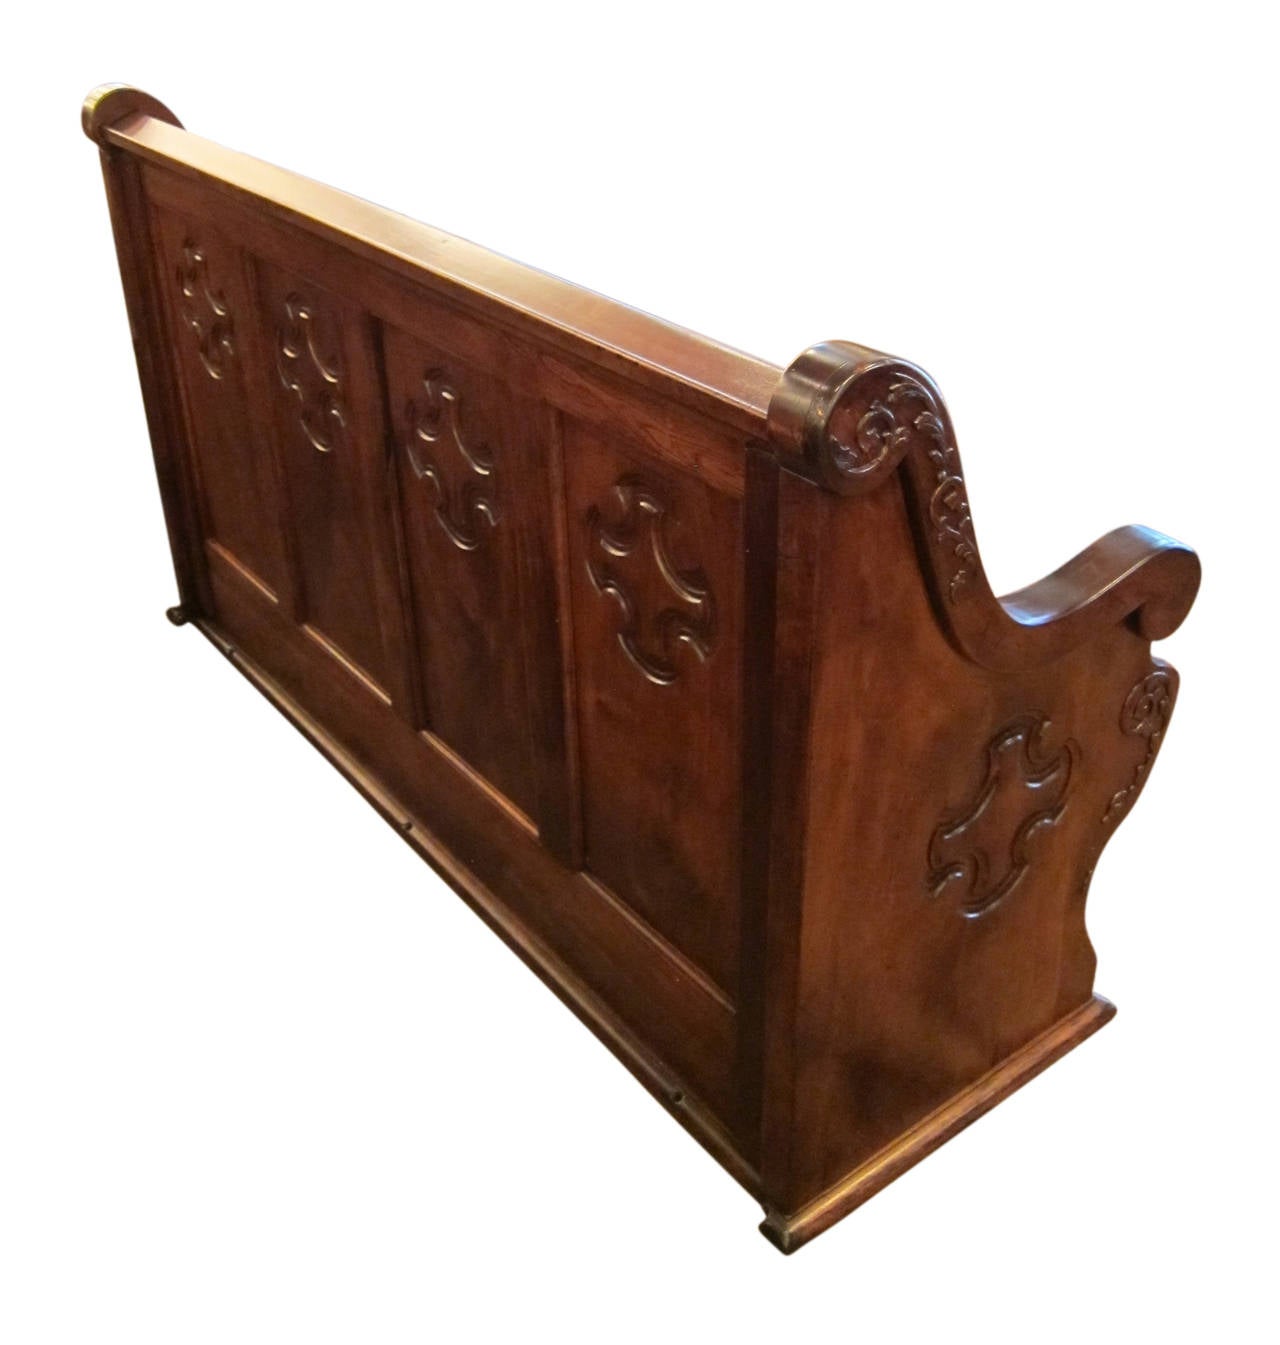 American Late 1890s Carved Wooden Church Pew with Full Paneled Back from Brooklyn